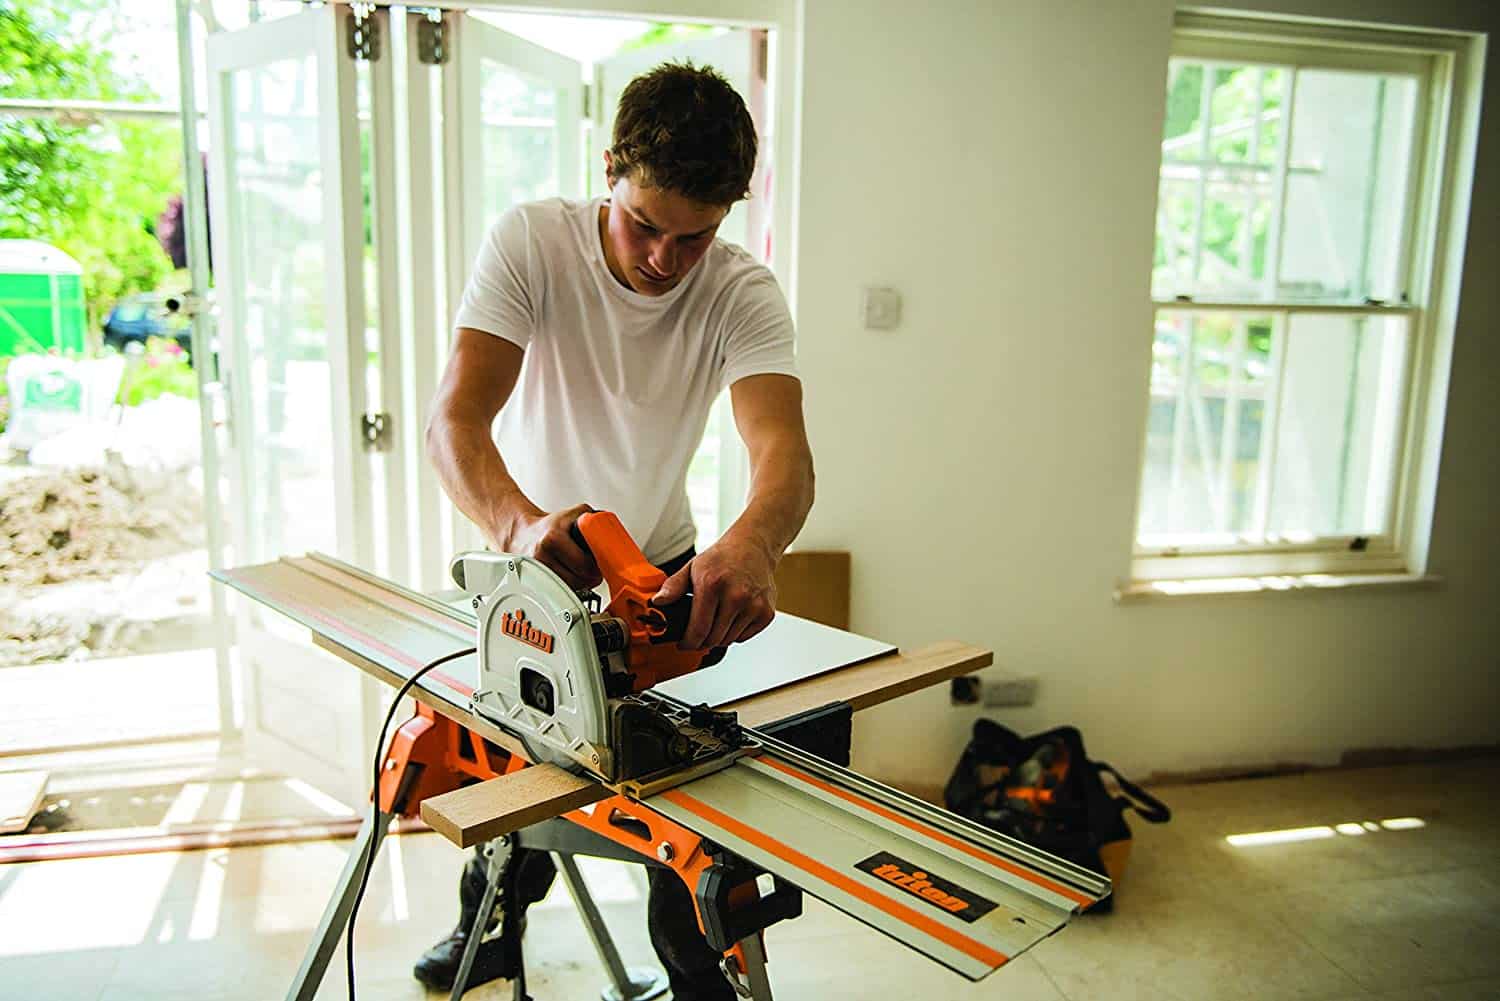 Triton TTS1400 Track Saw pros and cons